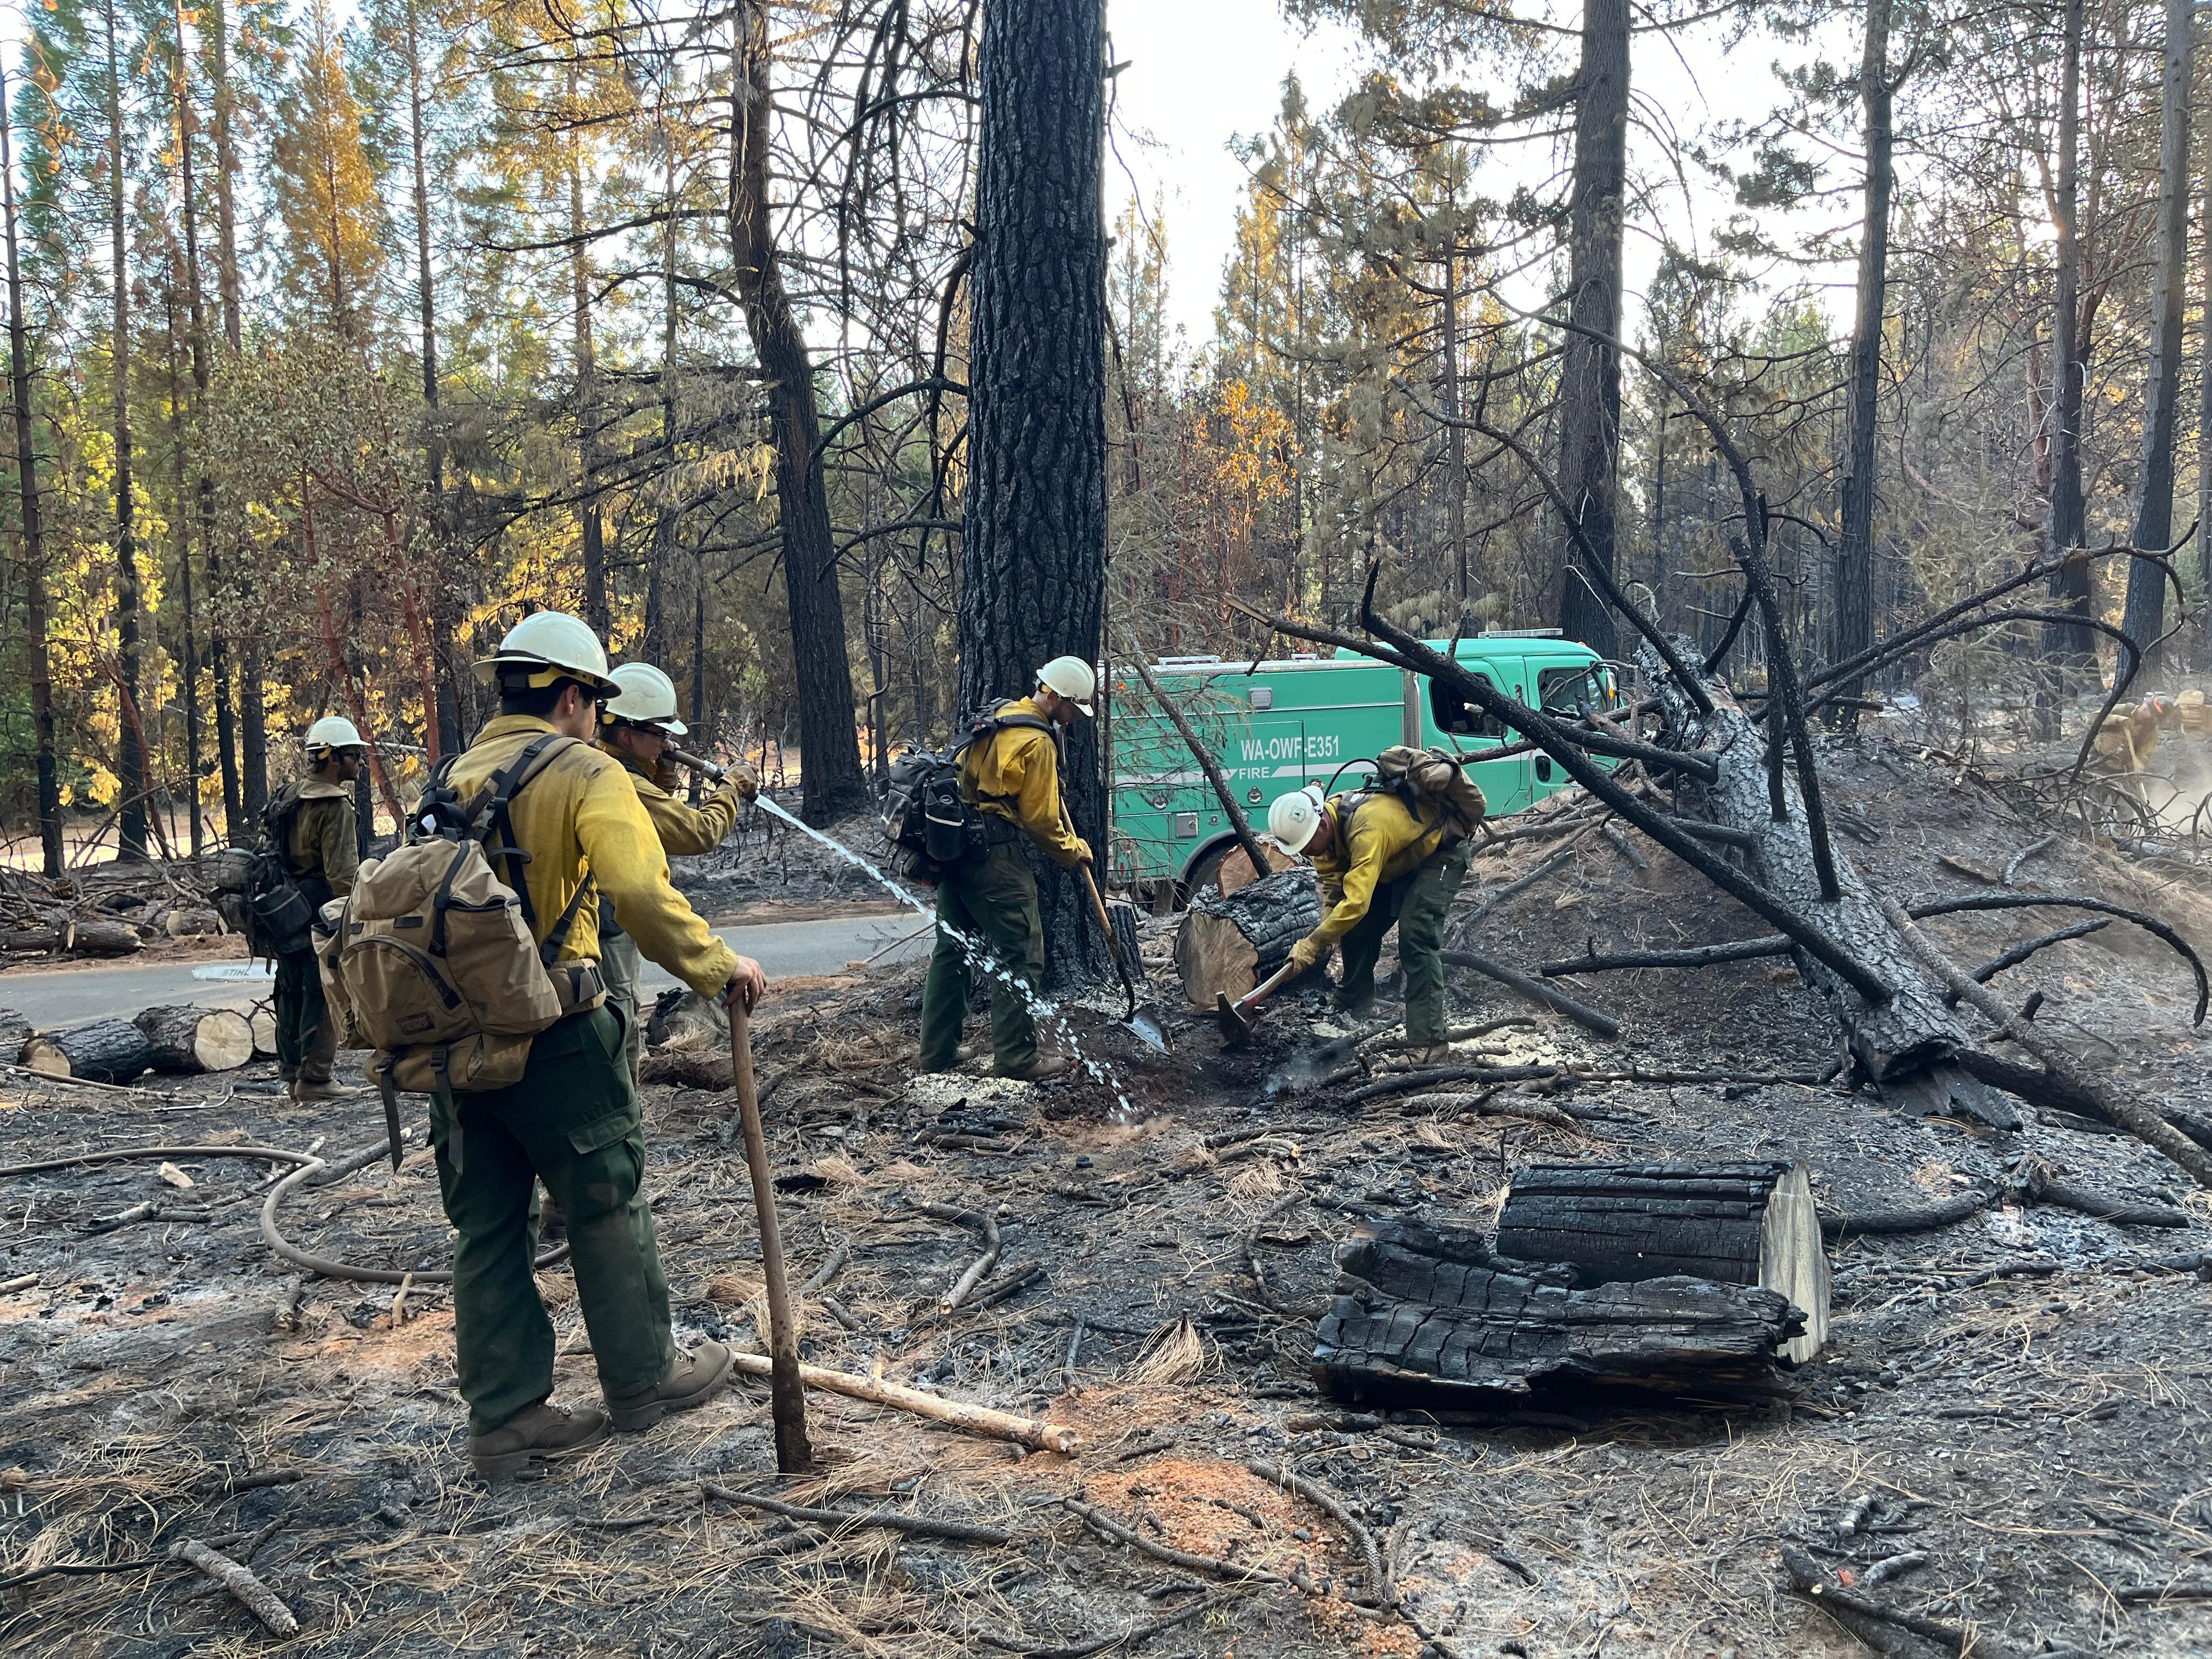 A female firefighter in a burned forest, sprays water from a firehose onto smoking ground that is still hot with smoldering fire. 4 male firefighters use hand tools to scrape the ground and water to extinguish the smoke